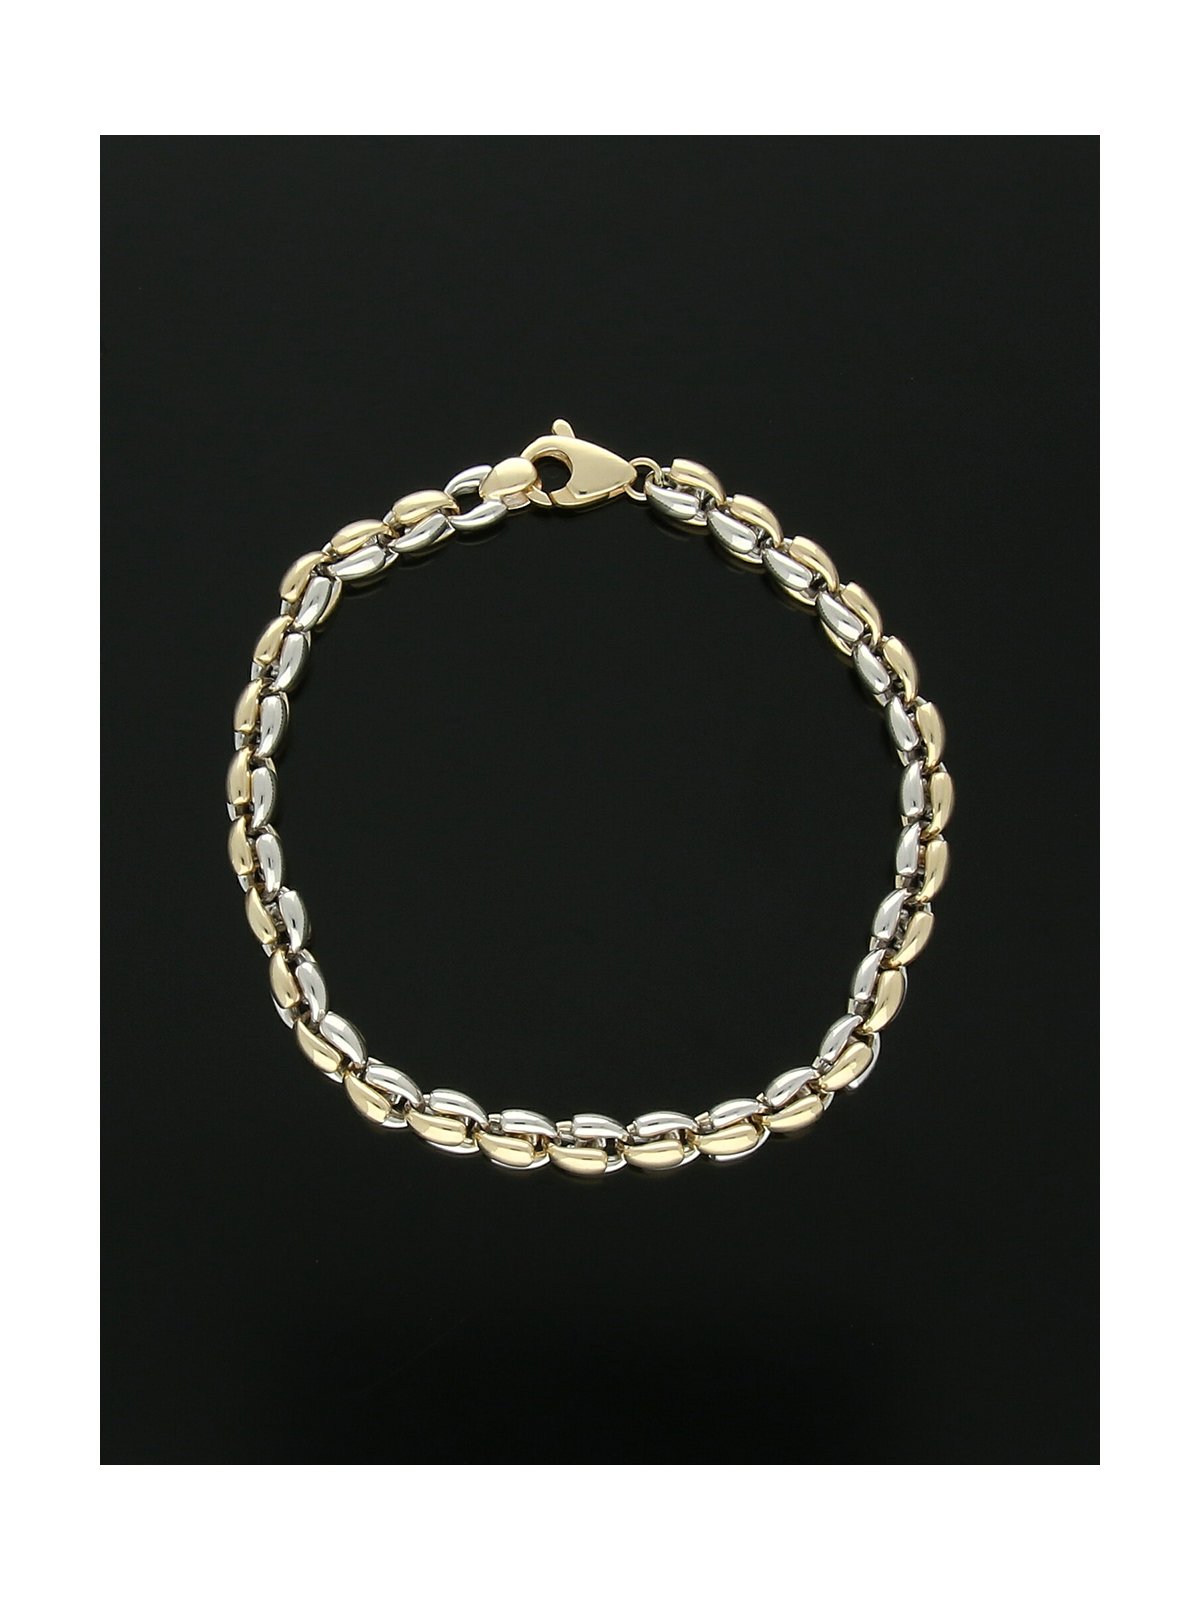 Link Bracelet in 9ct Yellow and White Gold